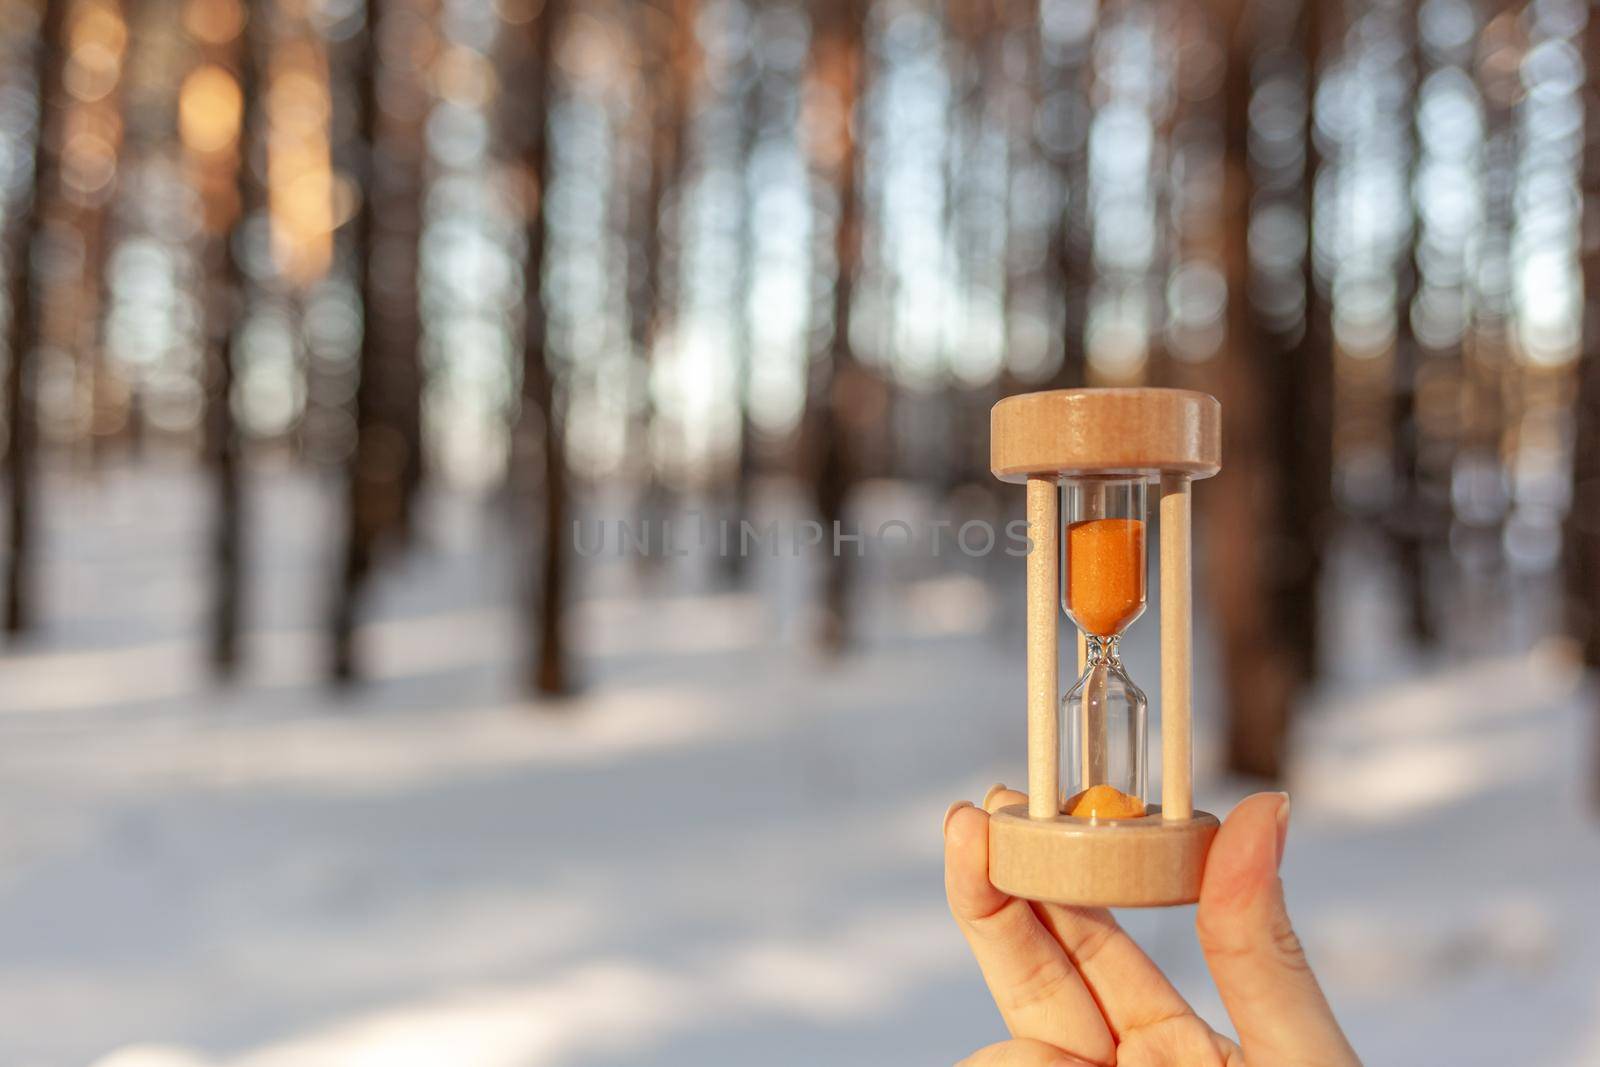 Winter is coming. Hourglass in the snow. sandglass Hourglass as a symbol of changing of the seasons. Spring is coming. melting snow. Hourglass in a woman's hand in a snowy forest in winter